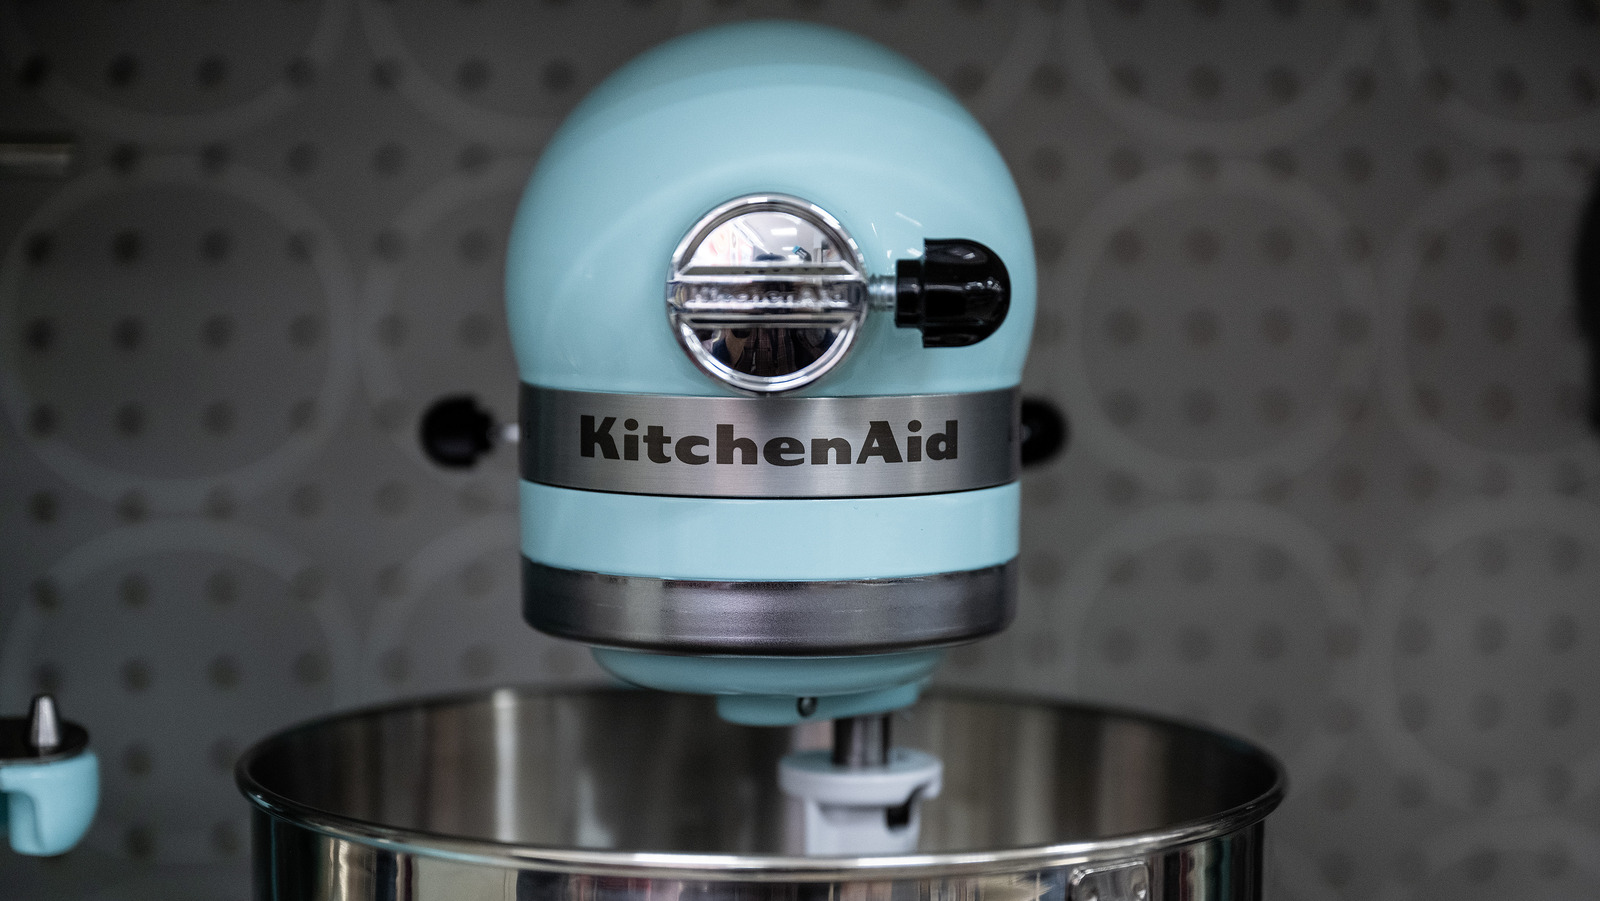 Can anyone tell me where to store those heavy Kitchenaid mixers